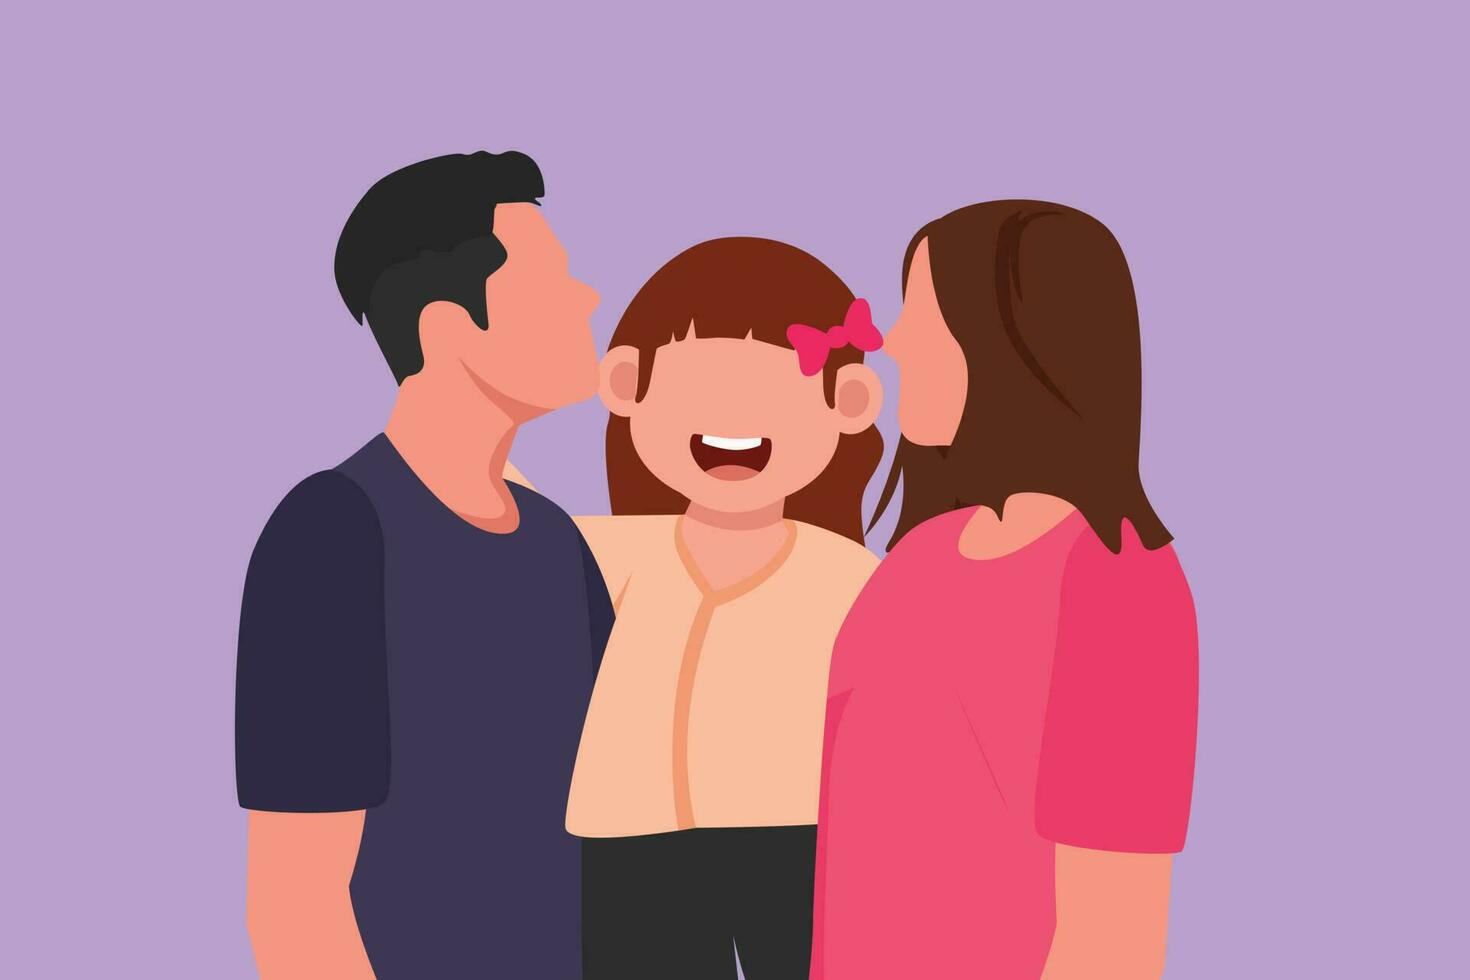 Character flat drawing of parents kissing their little girl on her cheeks. Adorable child with an innocent expression. National children day. Happy family with love. Cartoon design vector illustration